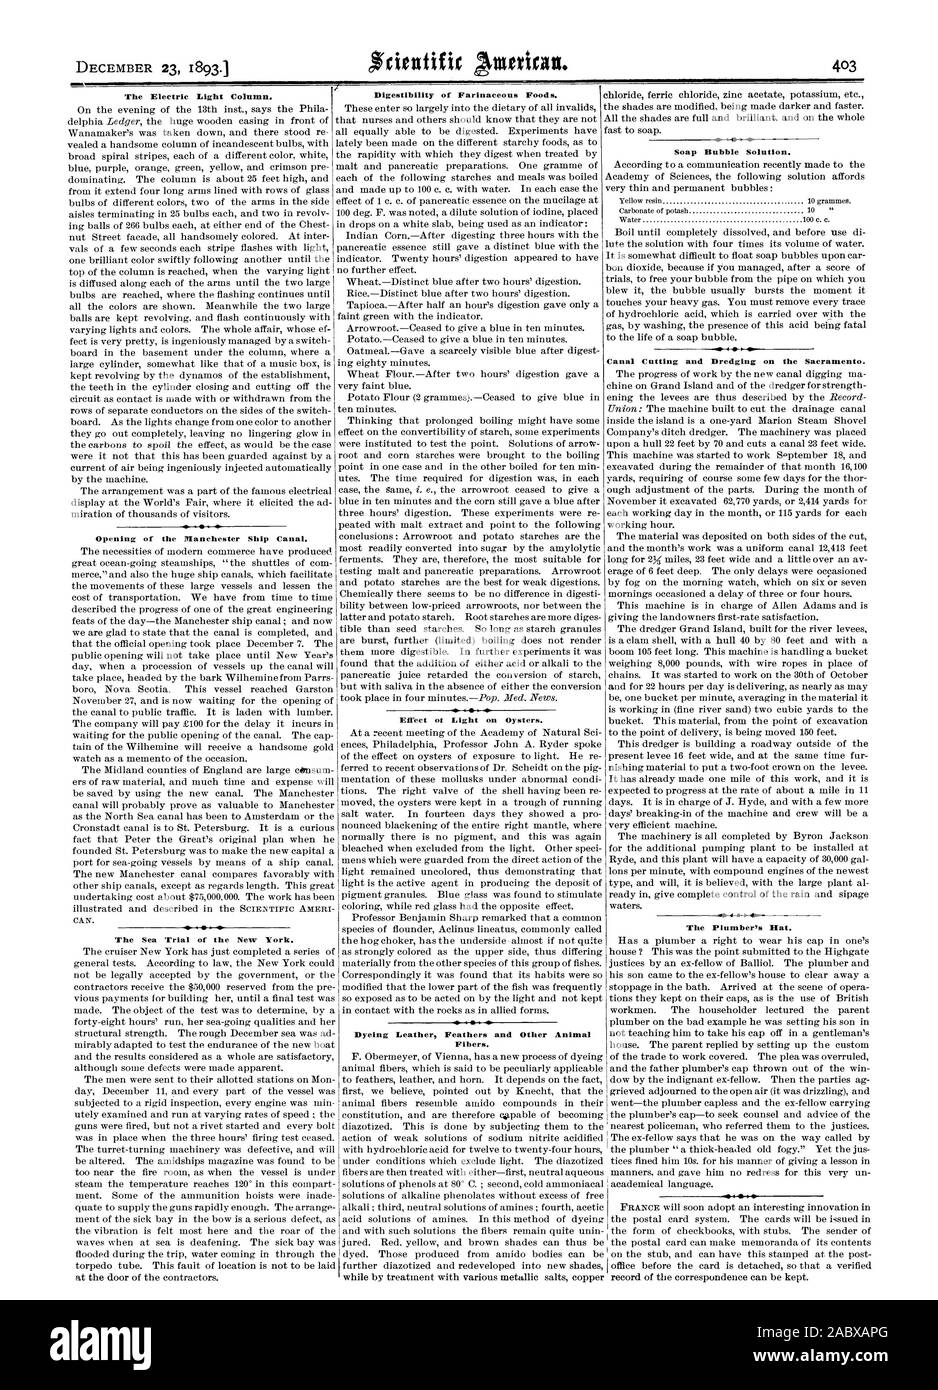 Digestibility of Farinaceous Foods. The Electric Light Column. Opening of the Manchester Ship Canal. The Sea Trial of the New York. Soap Bubble Solution. Canal Cutting and Dredging on the Sacramento. 4I 4  The Plumber's Mat. Effect of Light on Oysters. Dyeing Leather Feathers and Other Animal Fibers., scientific american, 1893-12-23 Stock Photo